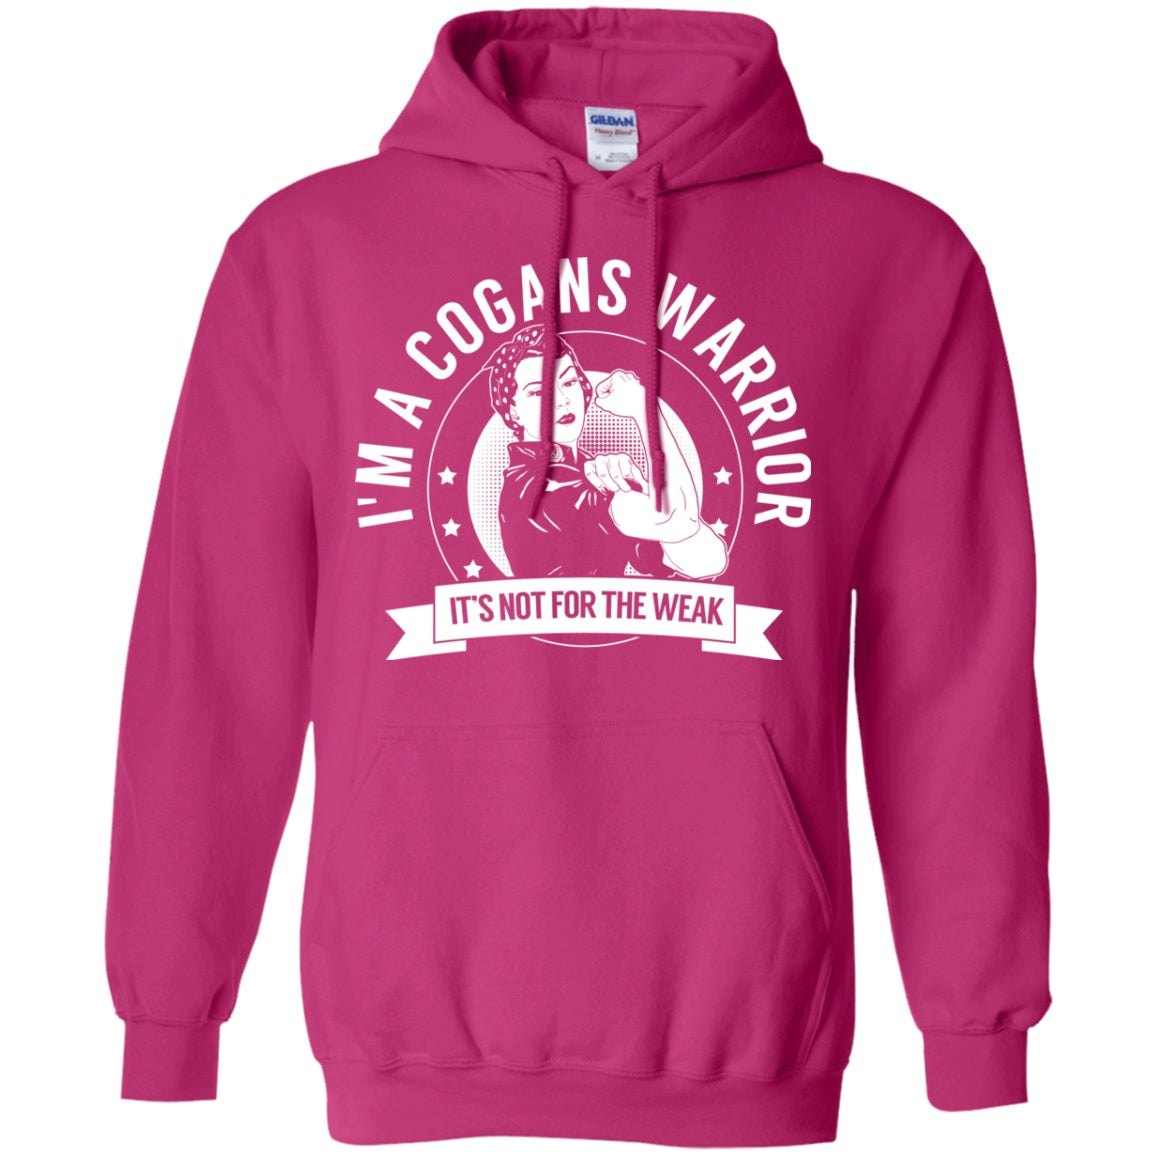 Cogans Warrior Not For The Weak Pullover Hoodie 8 oz. - The Unchargeables